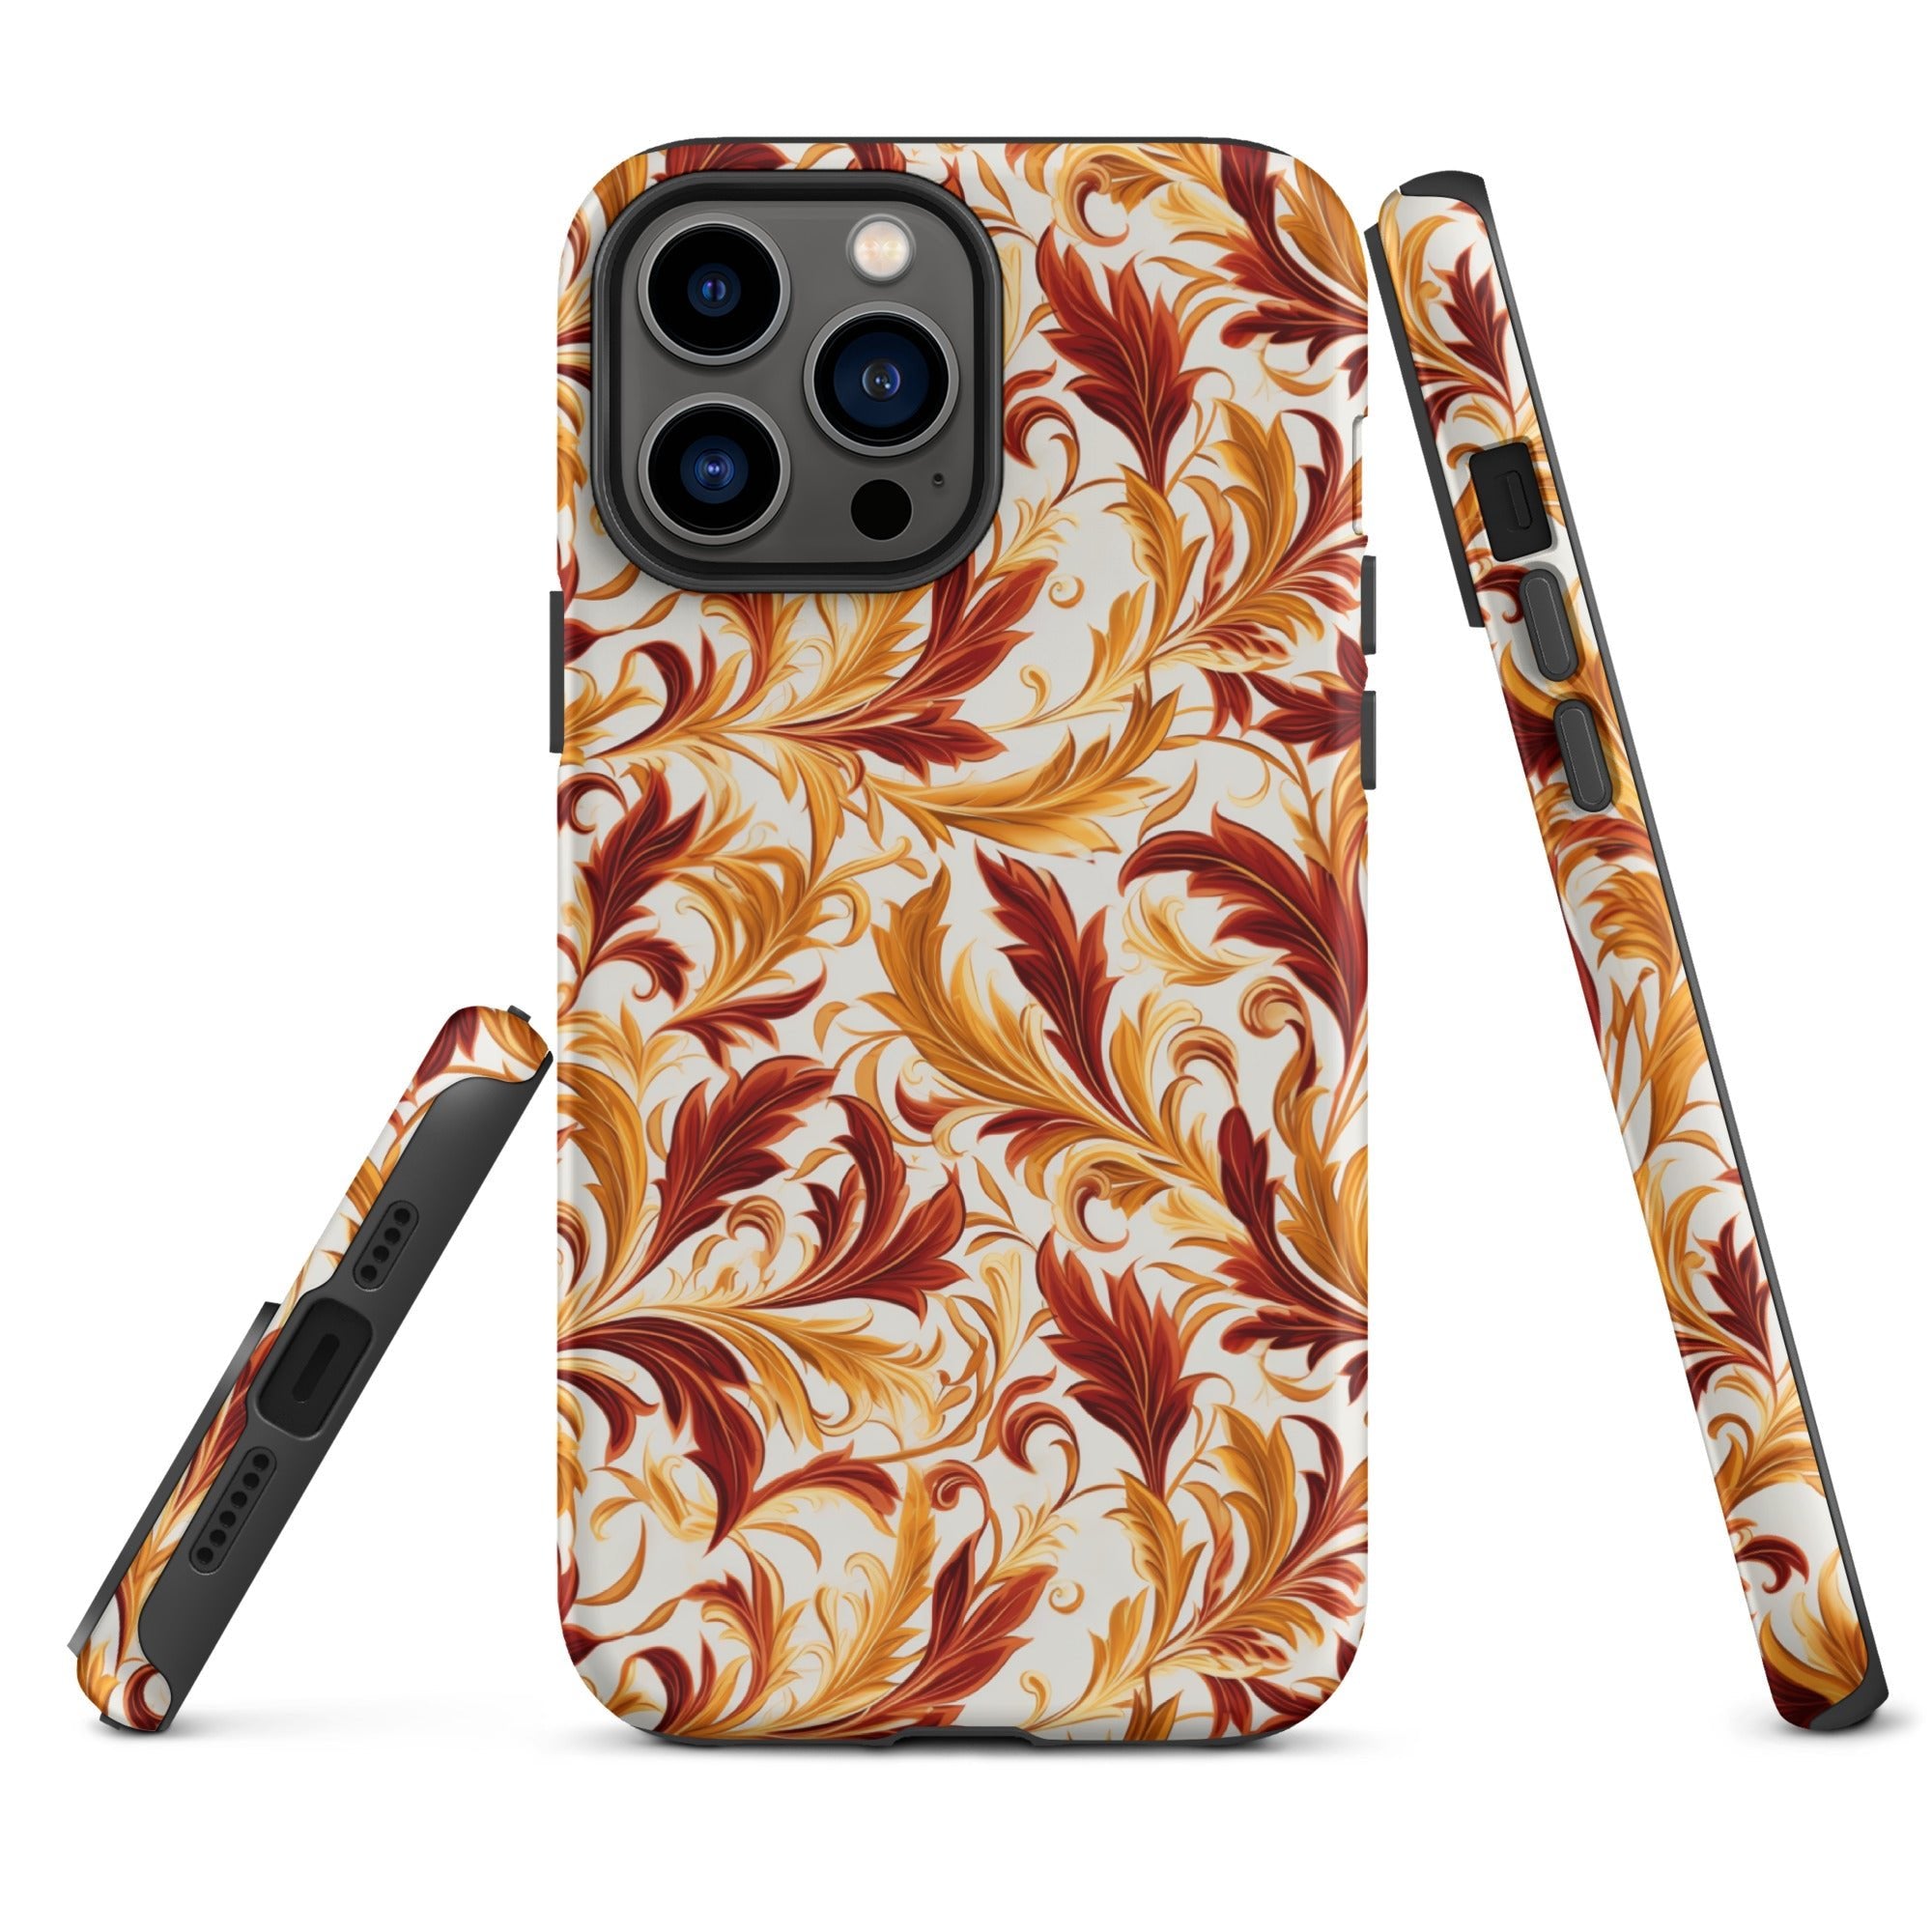 Swirling Autumn - Vortexes of Fall Foliage in Gold and Bronze - iPhone Case - Pattern Symphony